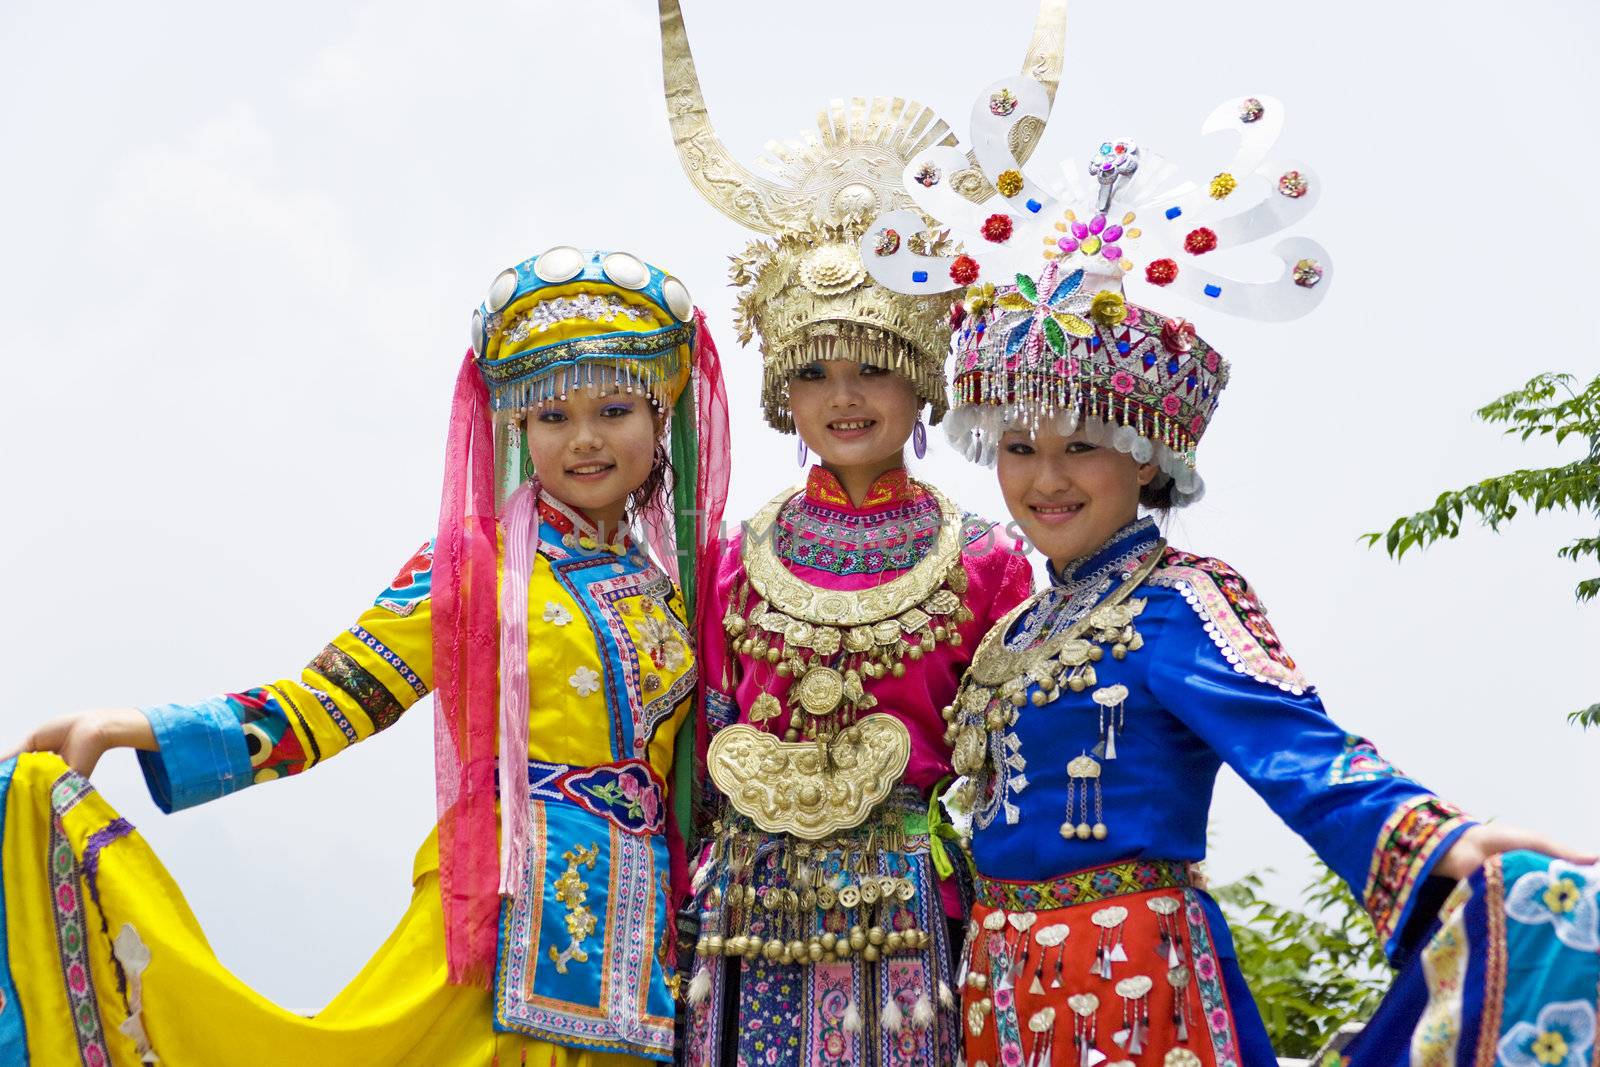 Image of young Chinese girls in traditional ethnic dress at Yao Mountain, Guilin, China.